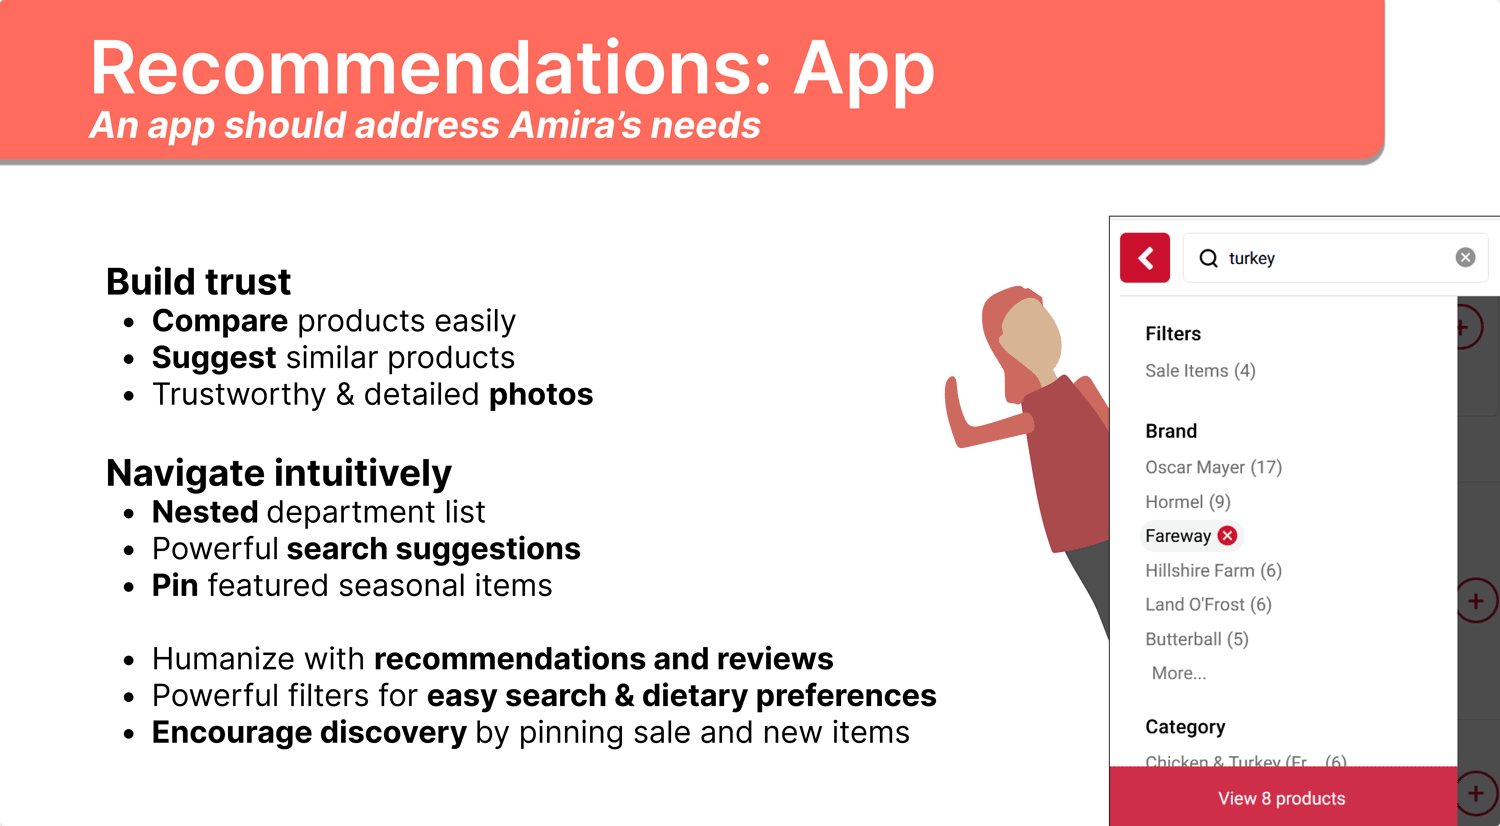 Recommendations for the app